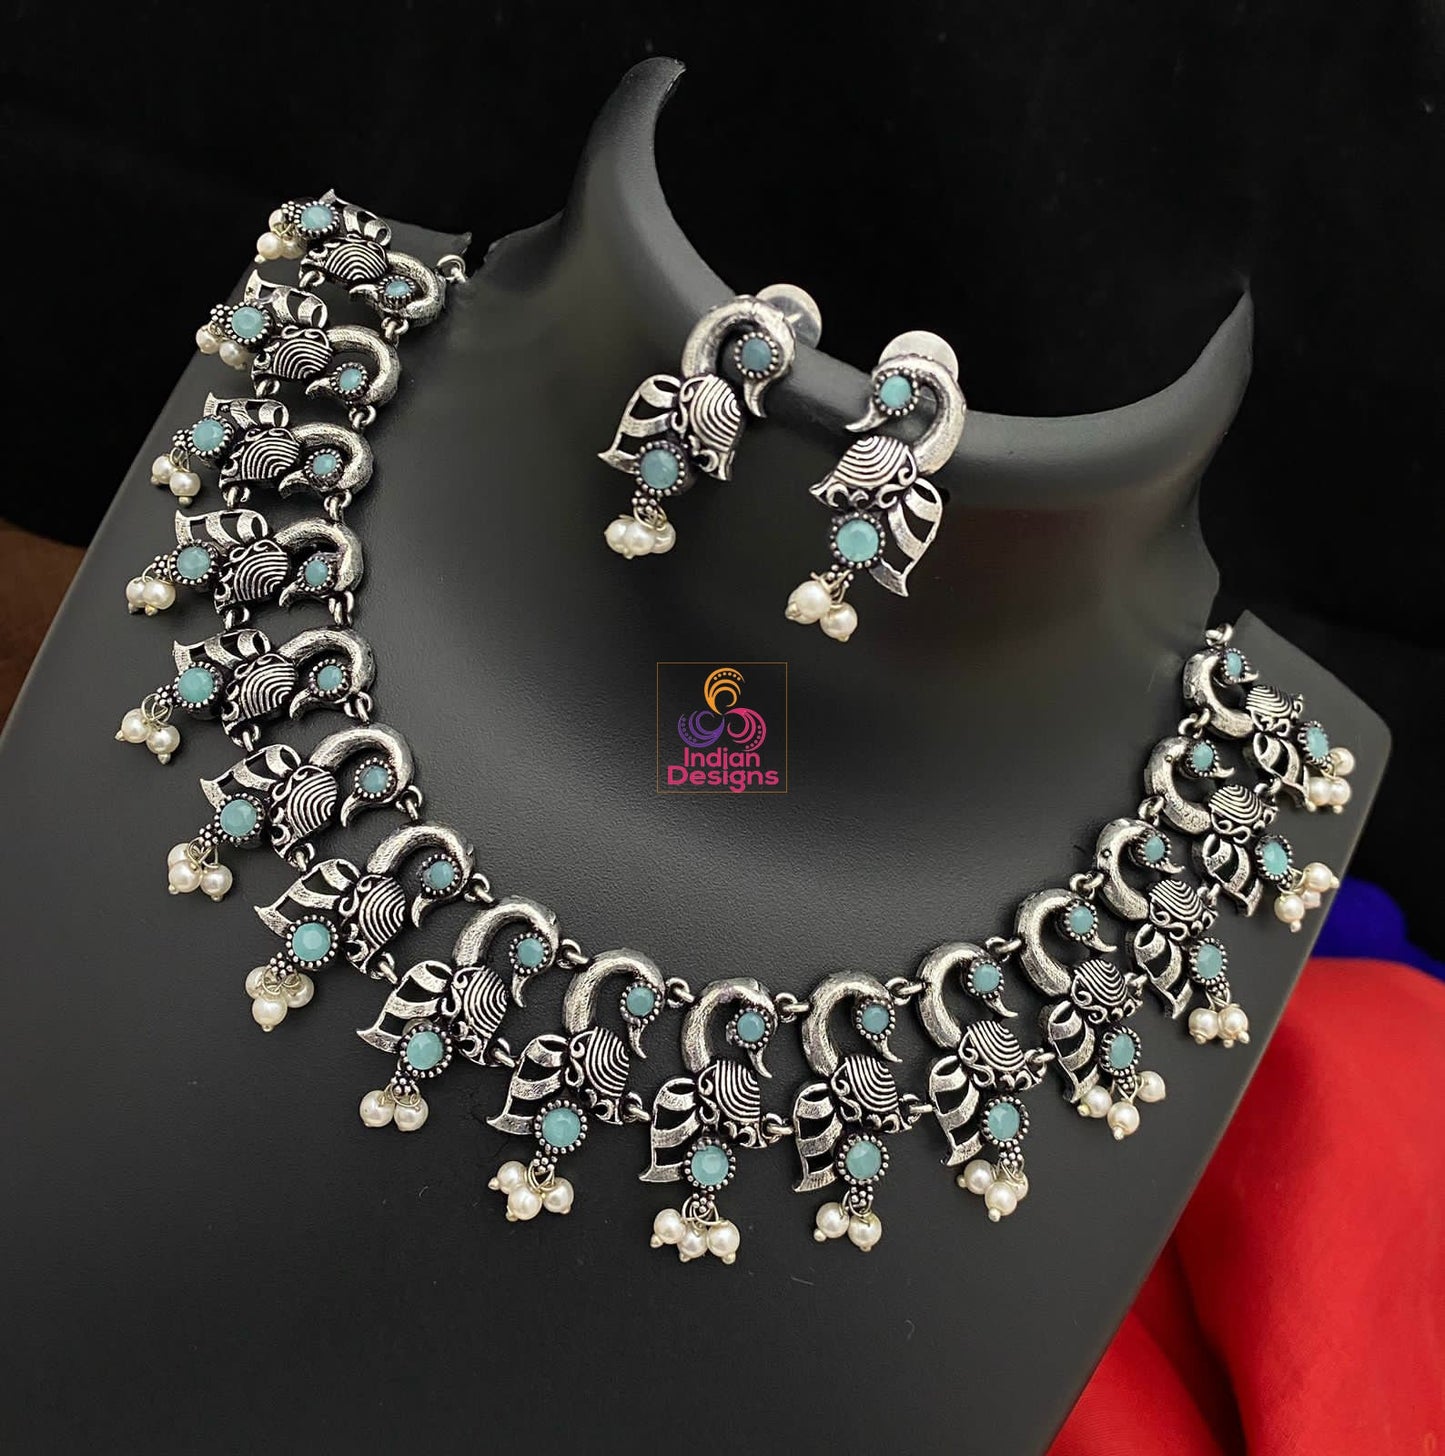 Oxidized Silver choker Necklace Earrings | Antique German Silver Jewelry set | Trendy Bollywood fashion Oxidized choker set | Indian Designs